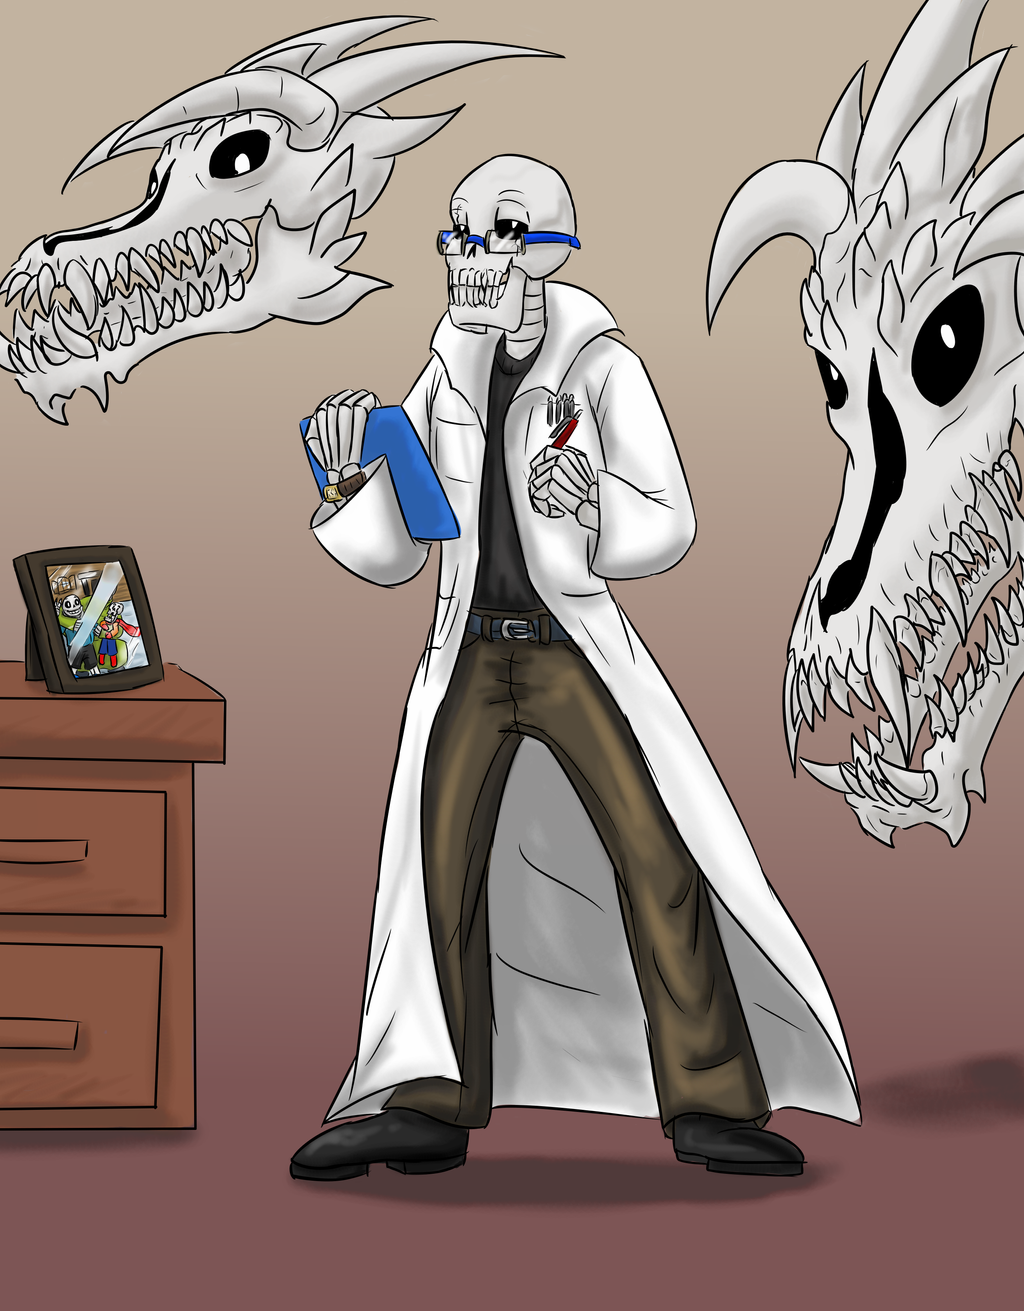 Dr. WD Gaster by loneIiness on DeviantArt